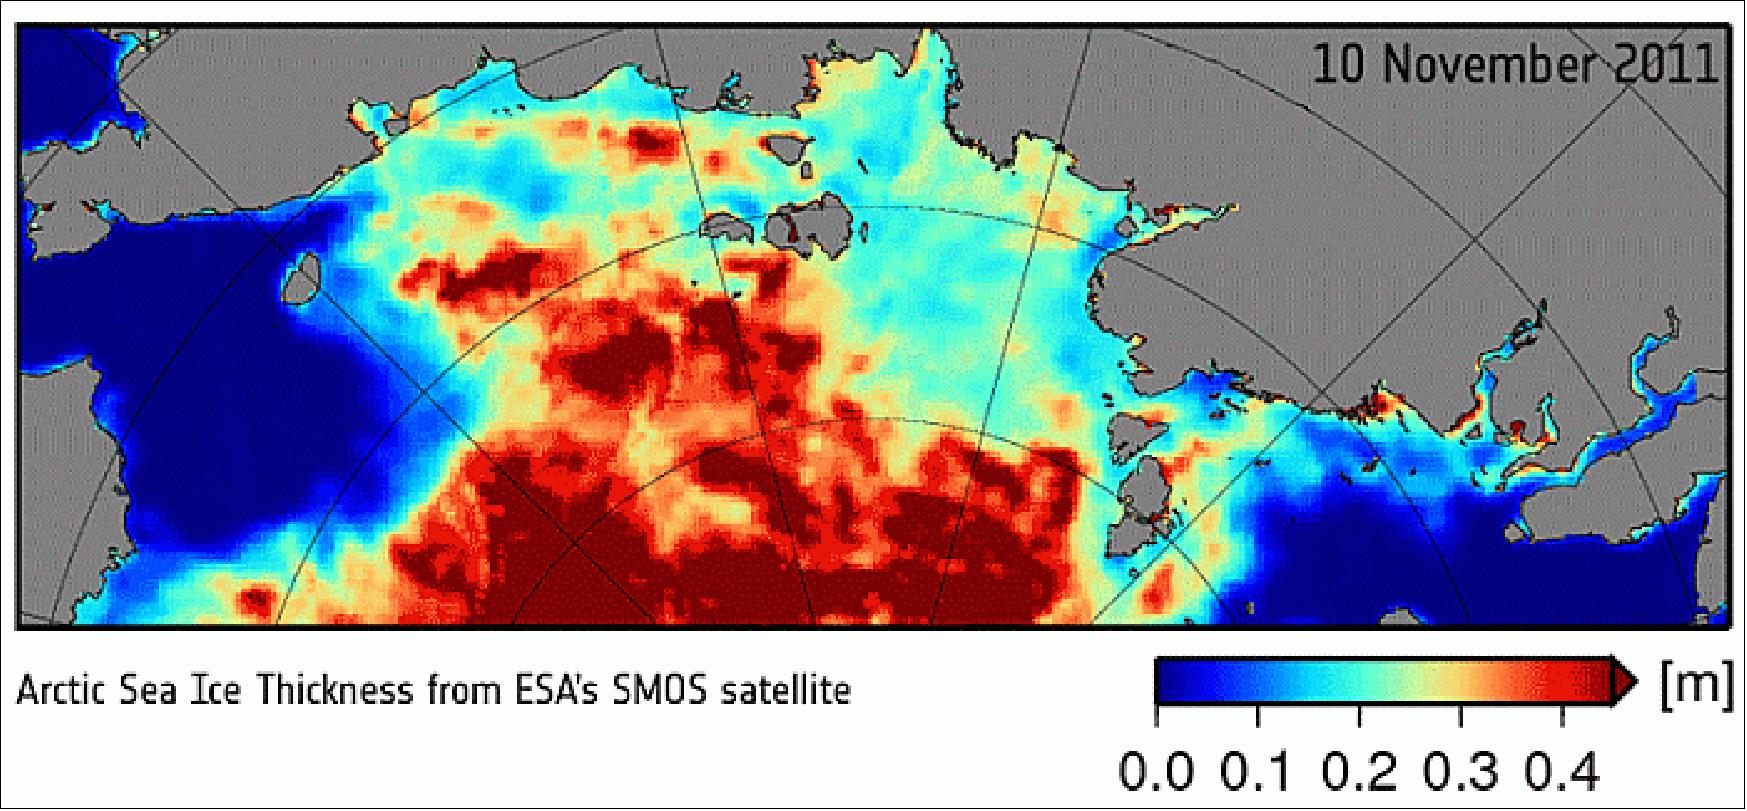 Figure 66: Animation of the Laptev Sea ice thickness from ESA's SMOS satellite (image credit: University of Hamburg Institute of Oceanography)